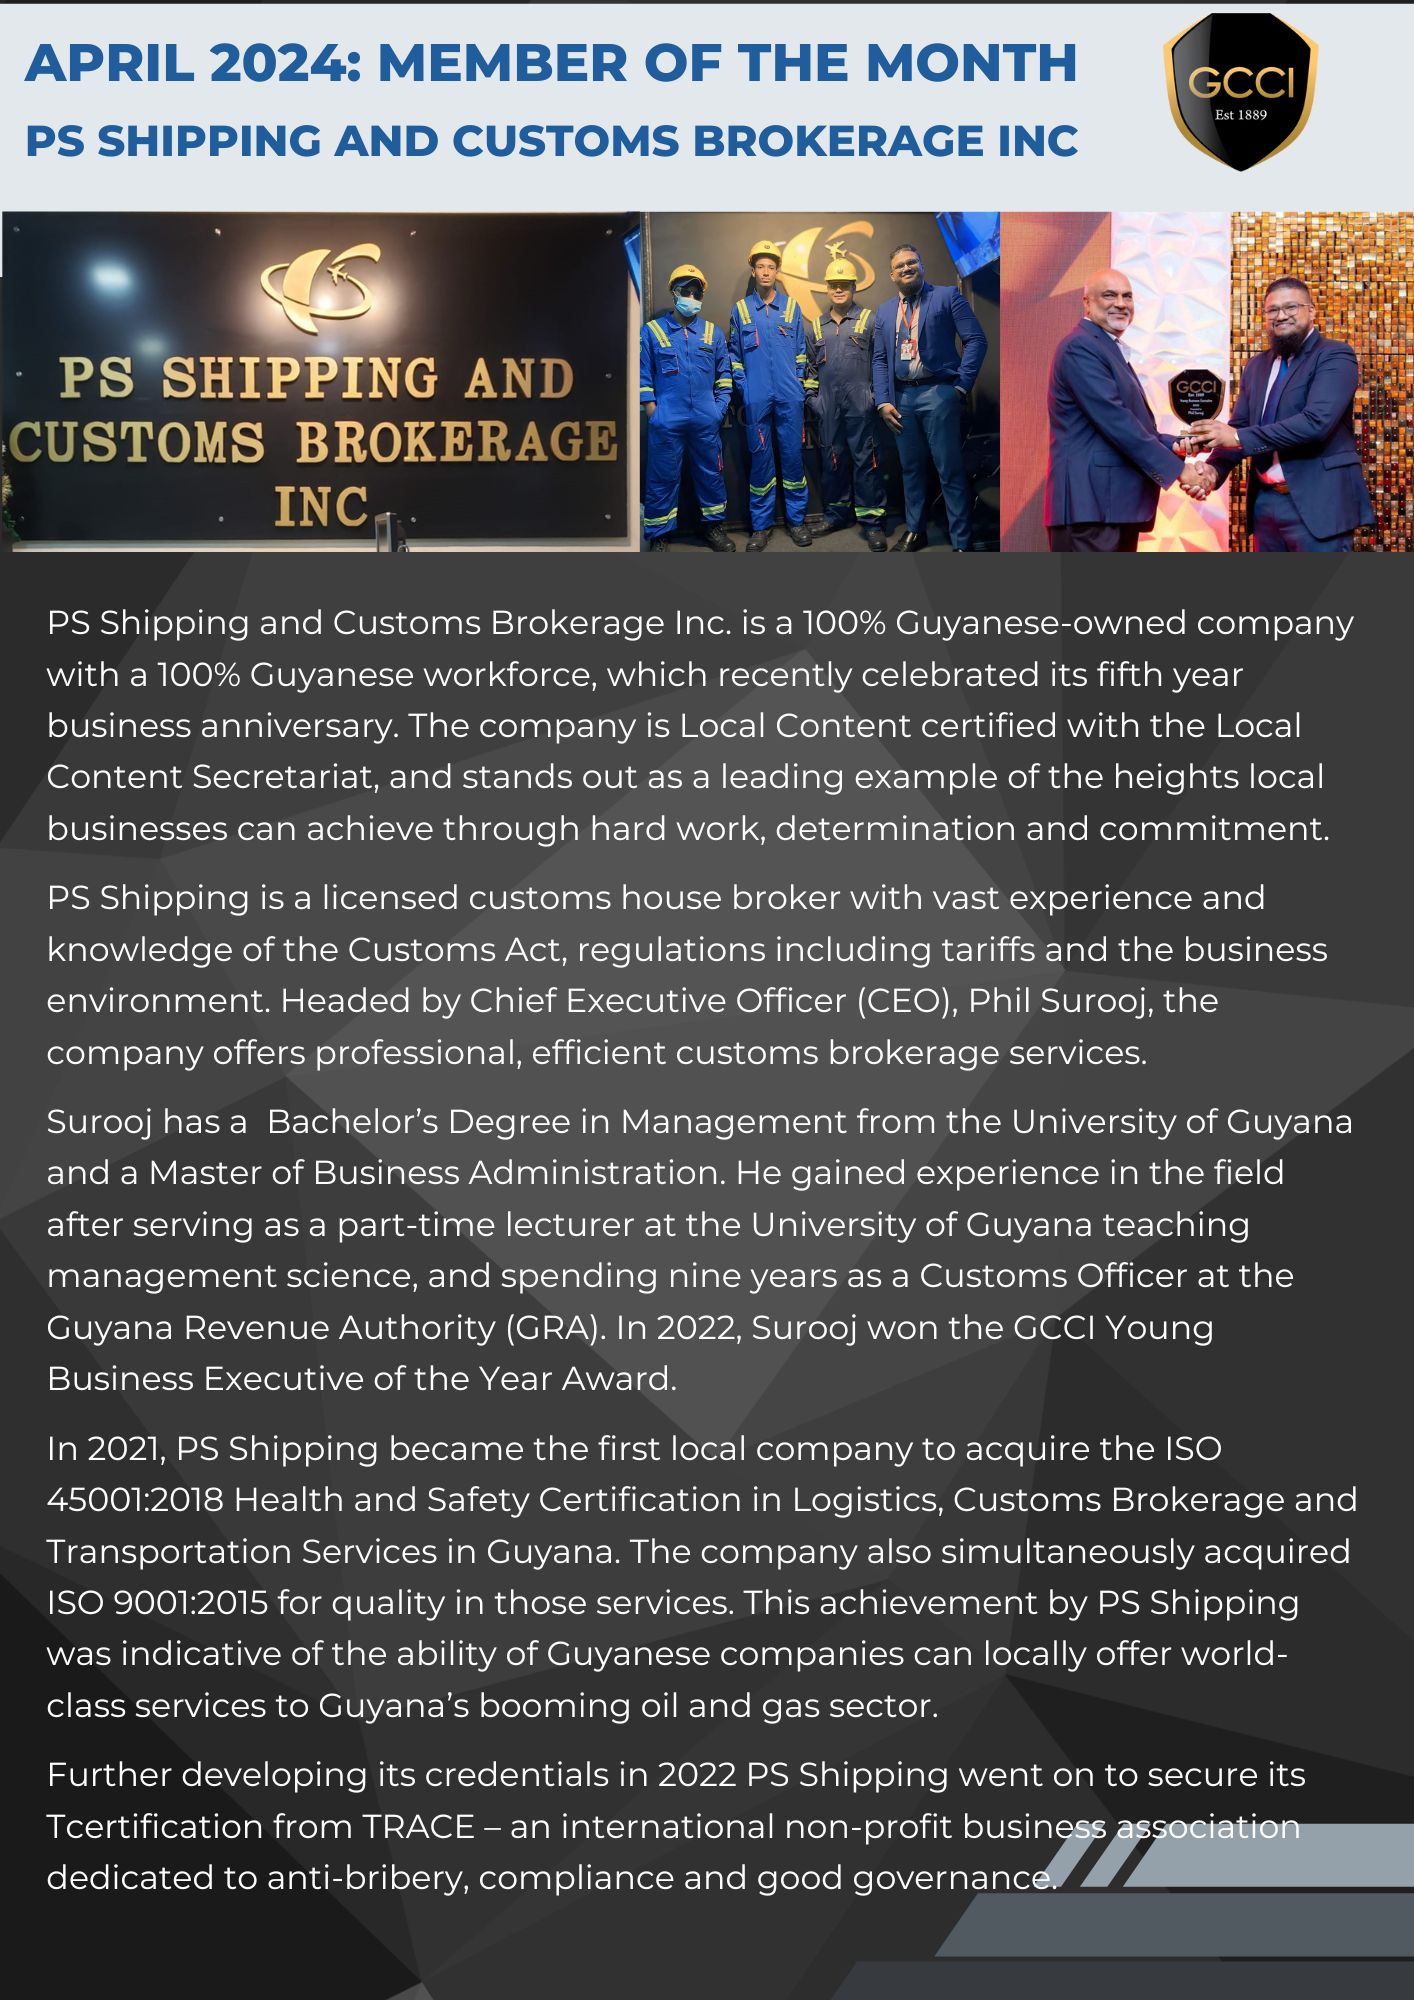 GCCI April 2024 Member of the Month: PS Shipping and Customs Brokerage Inc